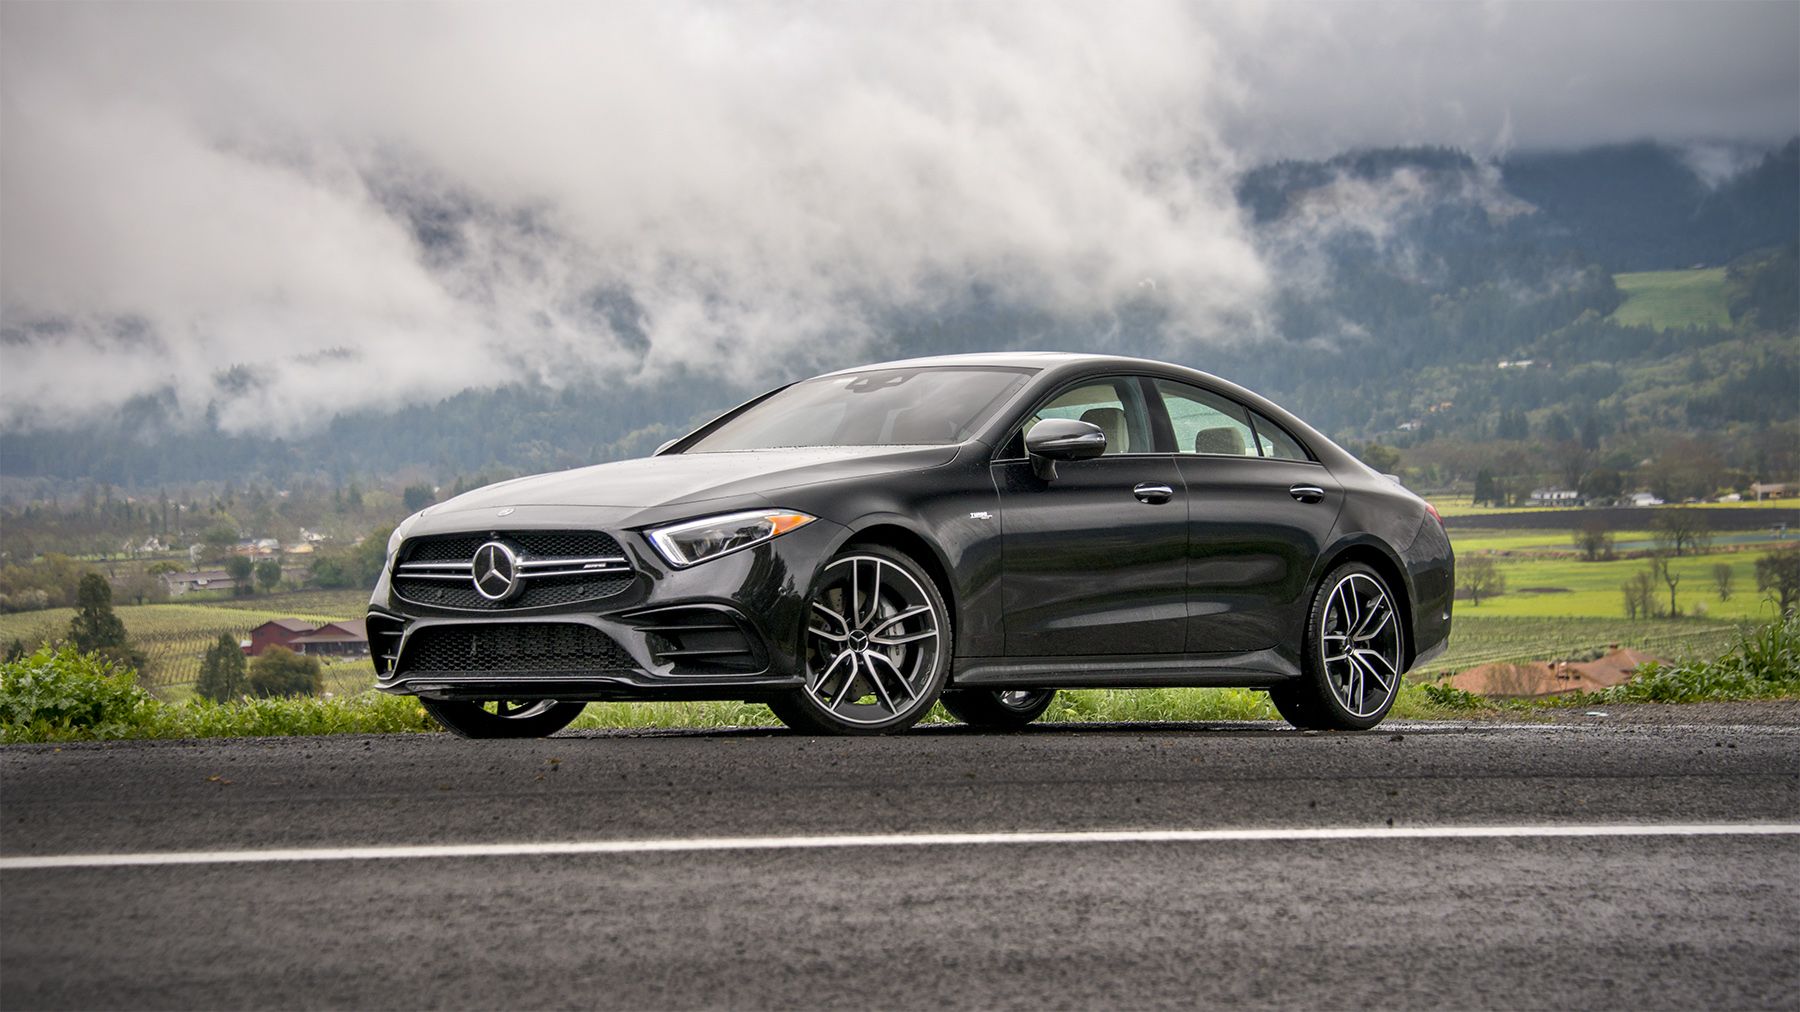 2019 Mercedes-AMG CLS53 drive reviews, specs, photos and price